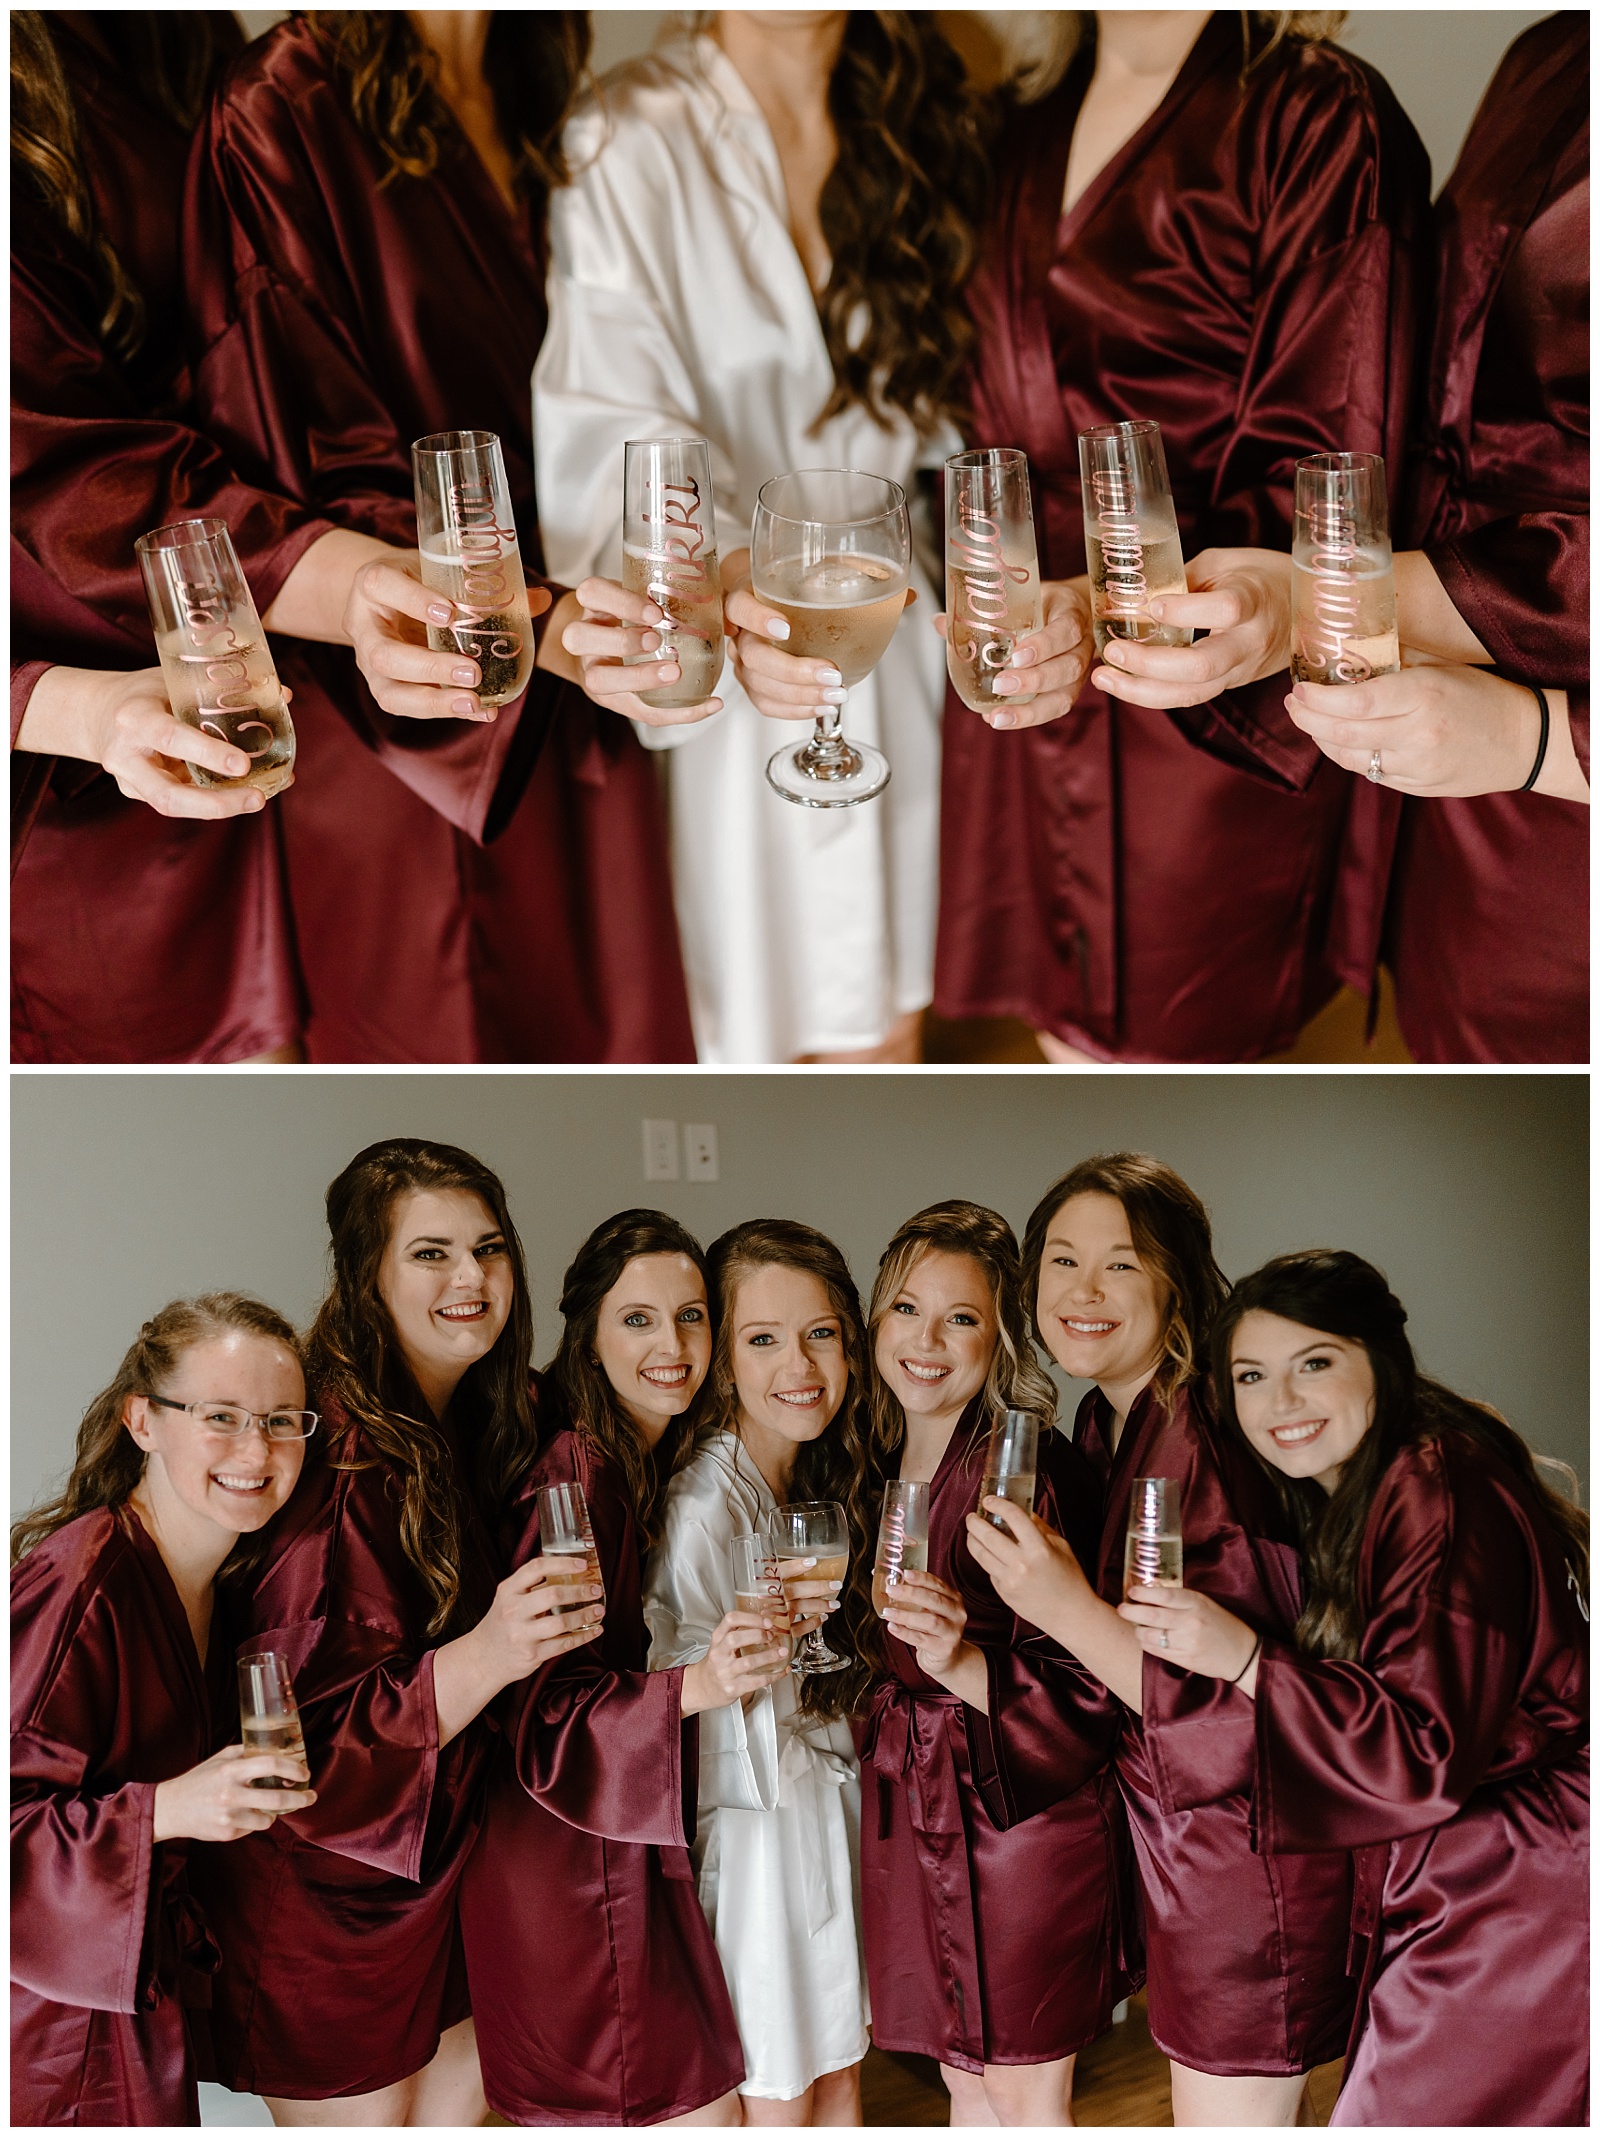 Bridal party in maroon robes huddle together for a toast, holding glasses that are custom made with each of their names.